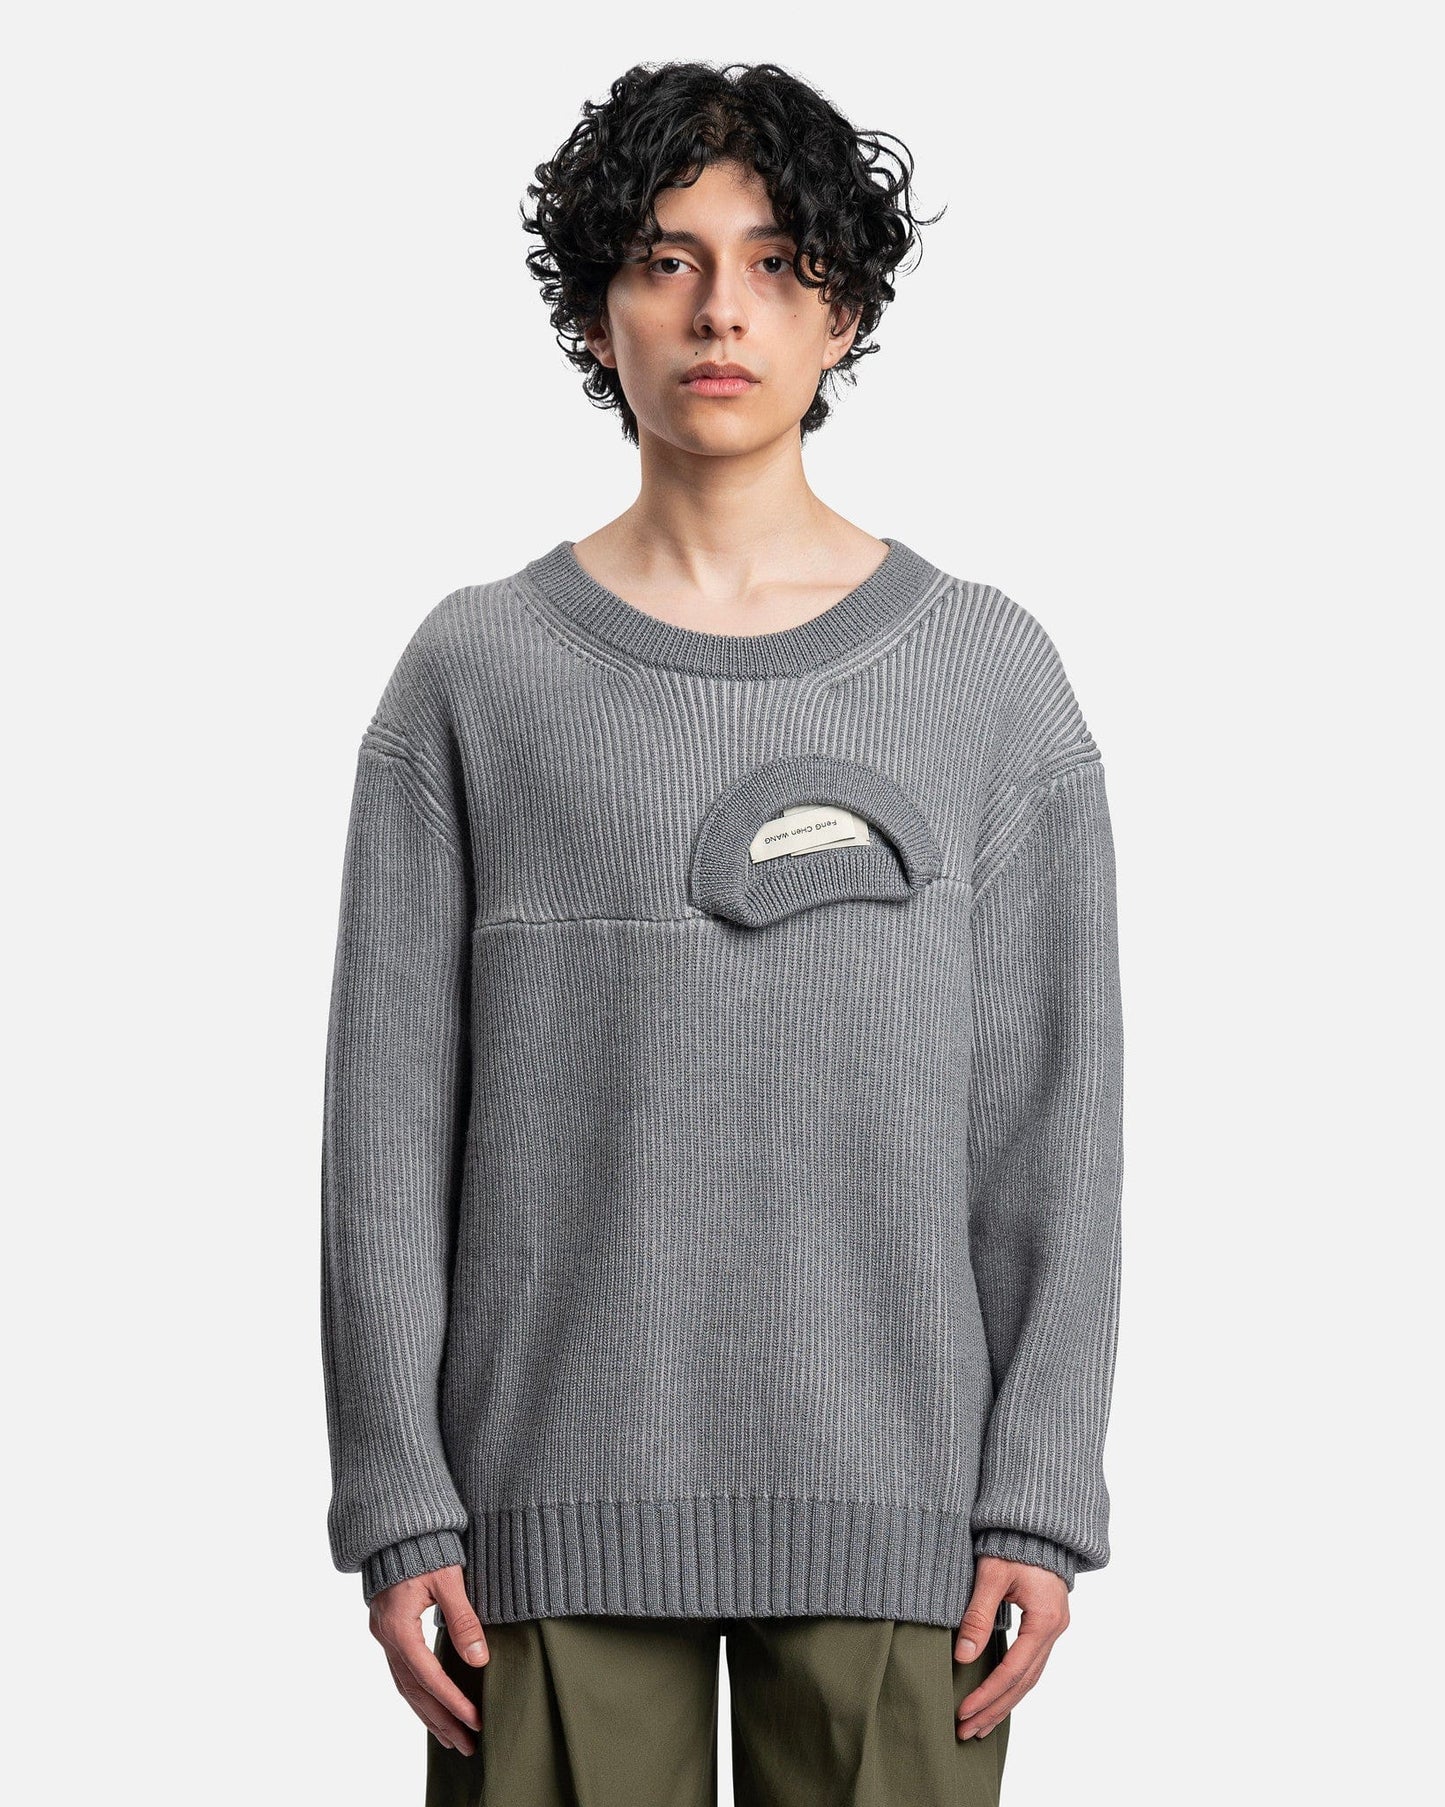 Feng Chen Wang Men's Sweater 2 in 1 Pullover Sweater in Grey